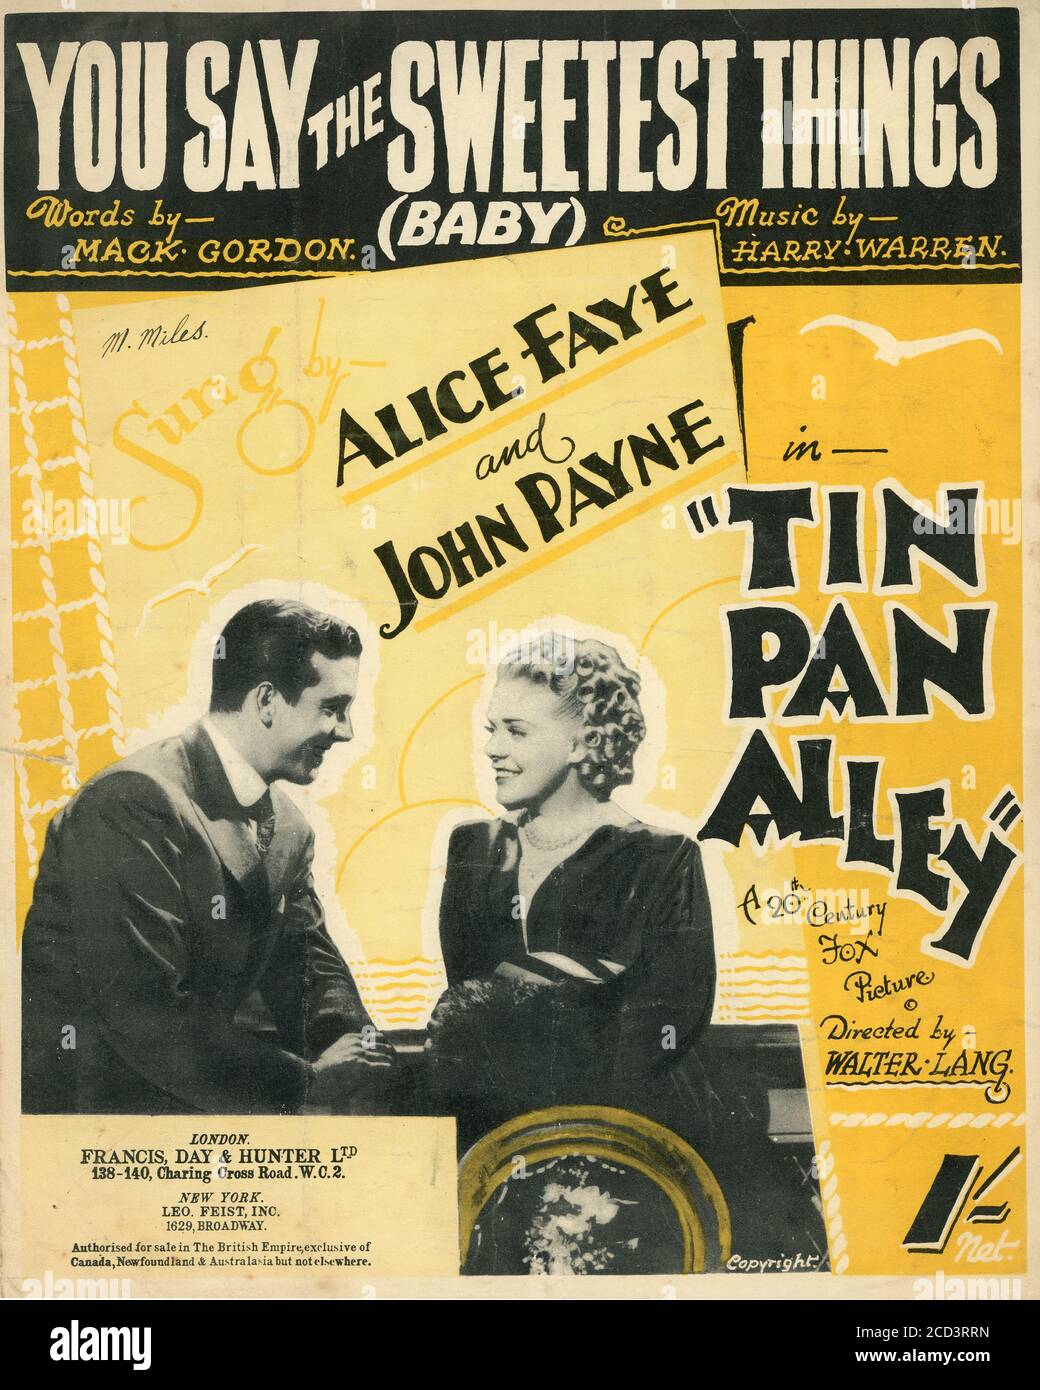 Sheet Music - You say the Sweetest Things (Baby) - Alice Faye and John Payne - 1940 Stock Photo